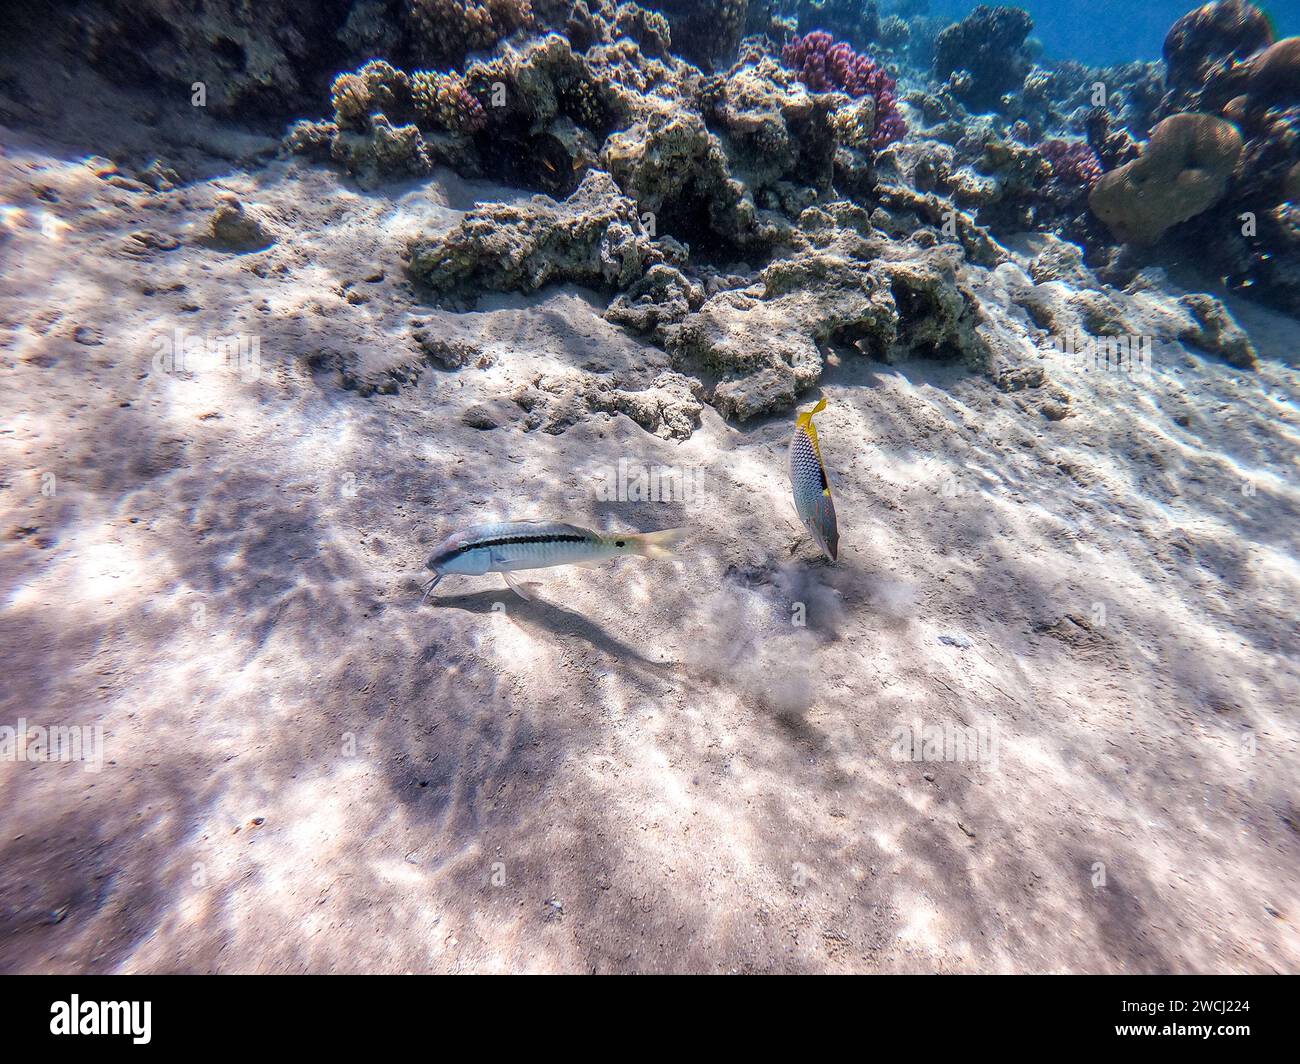 Tropical Forsskal goatfish known as Parupeneus forskali and Checkerboard wrasse known as Halichoeres hortulanus underwater on sand sea bottom at the Stock Photo